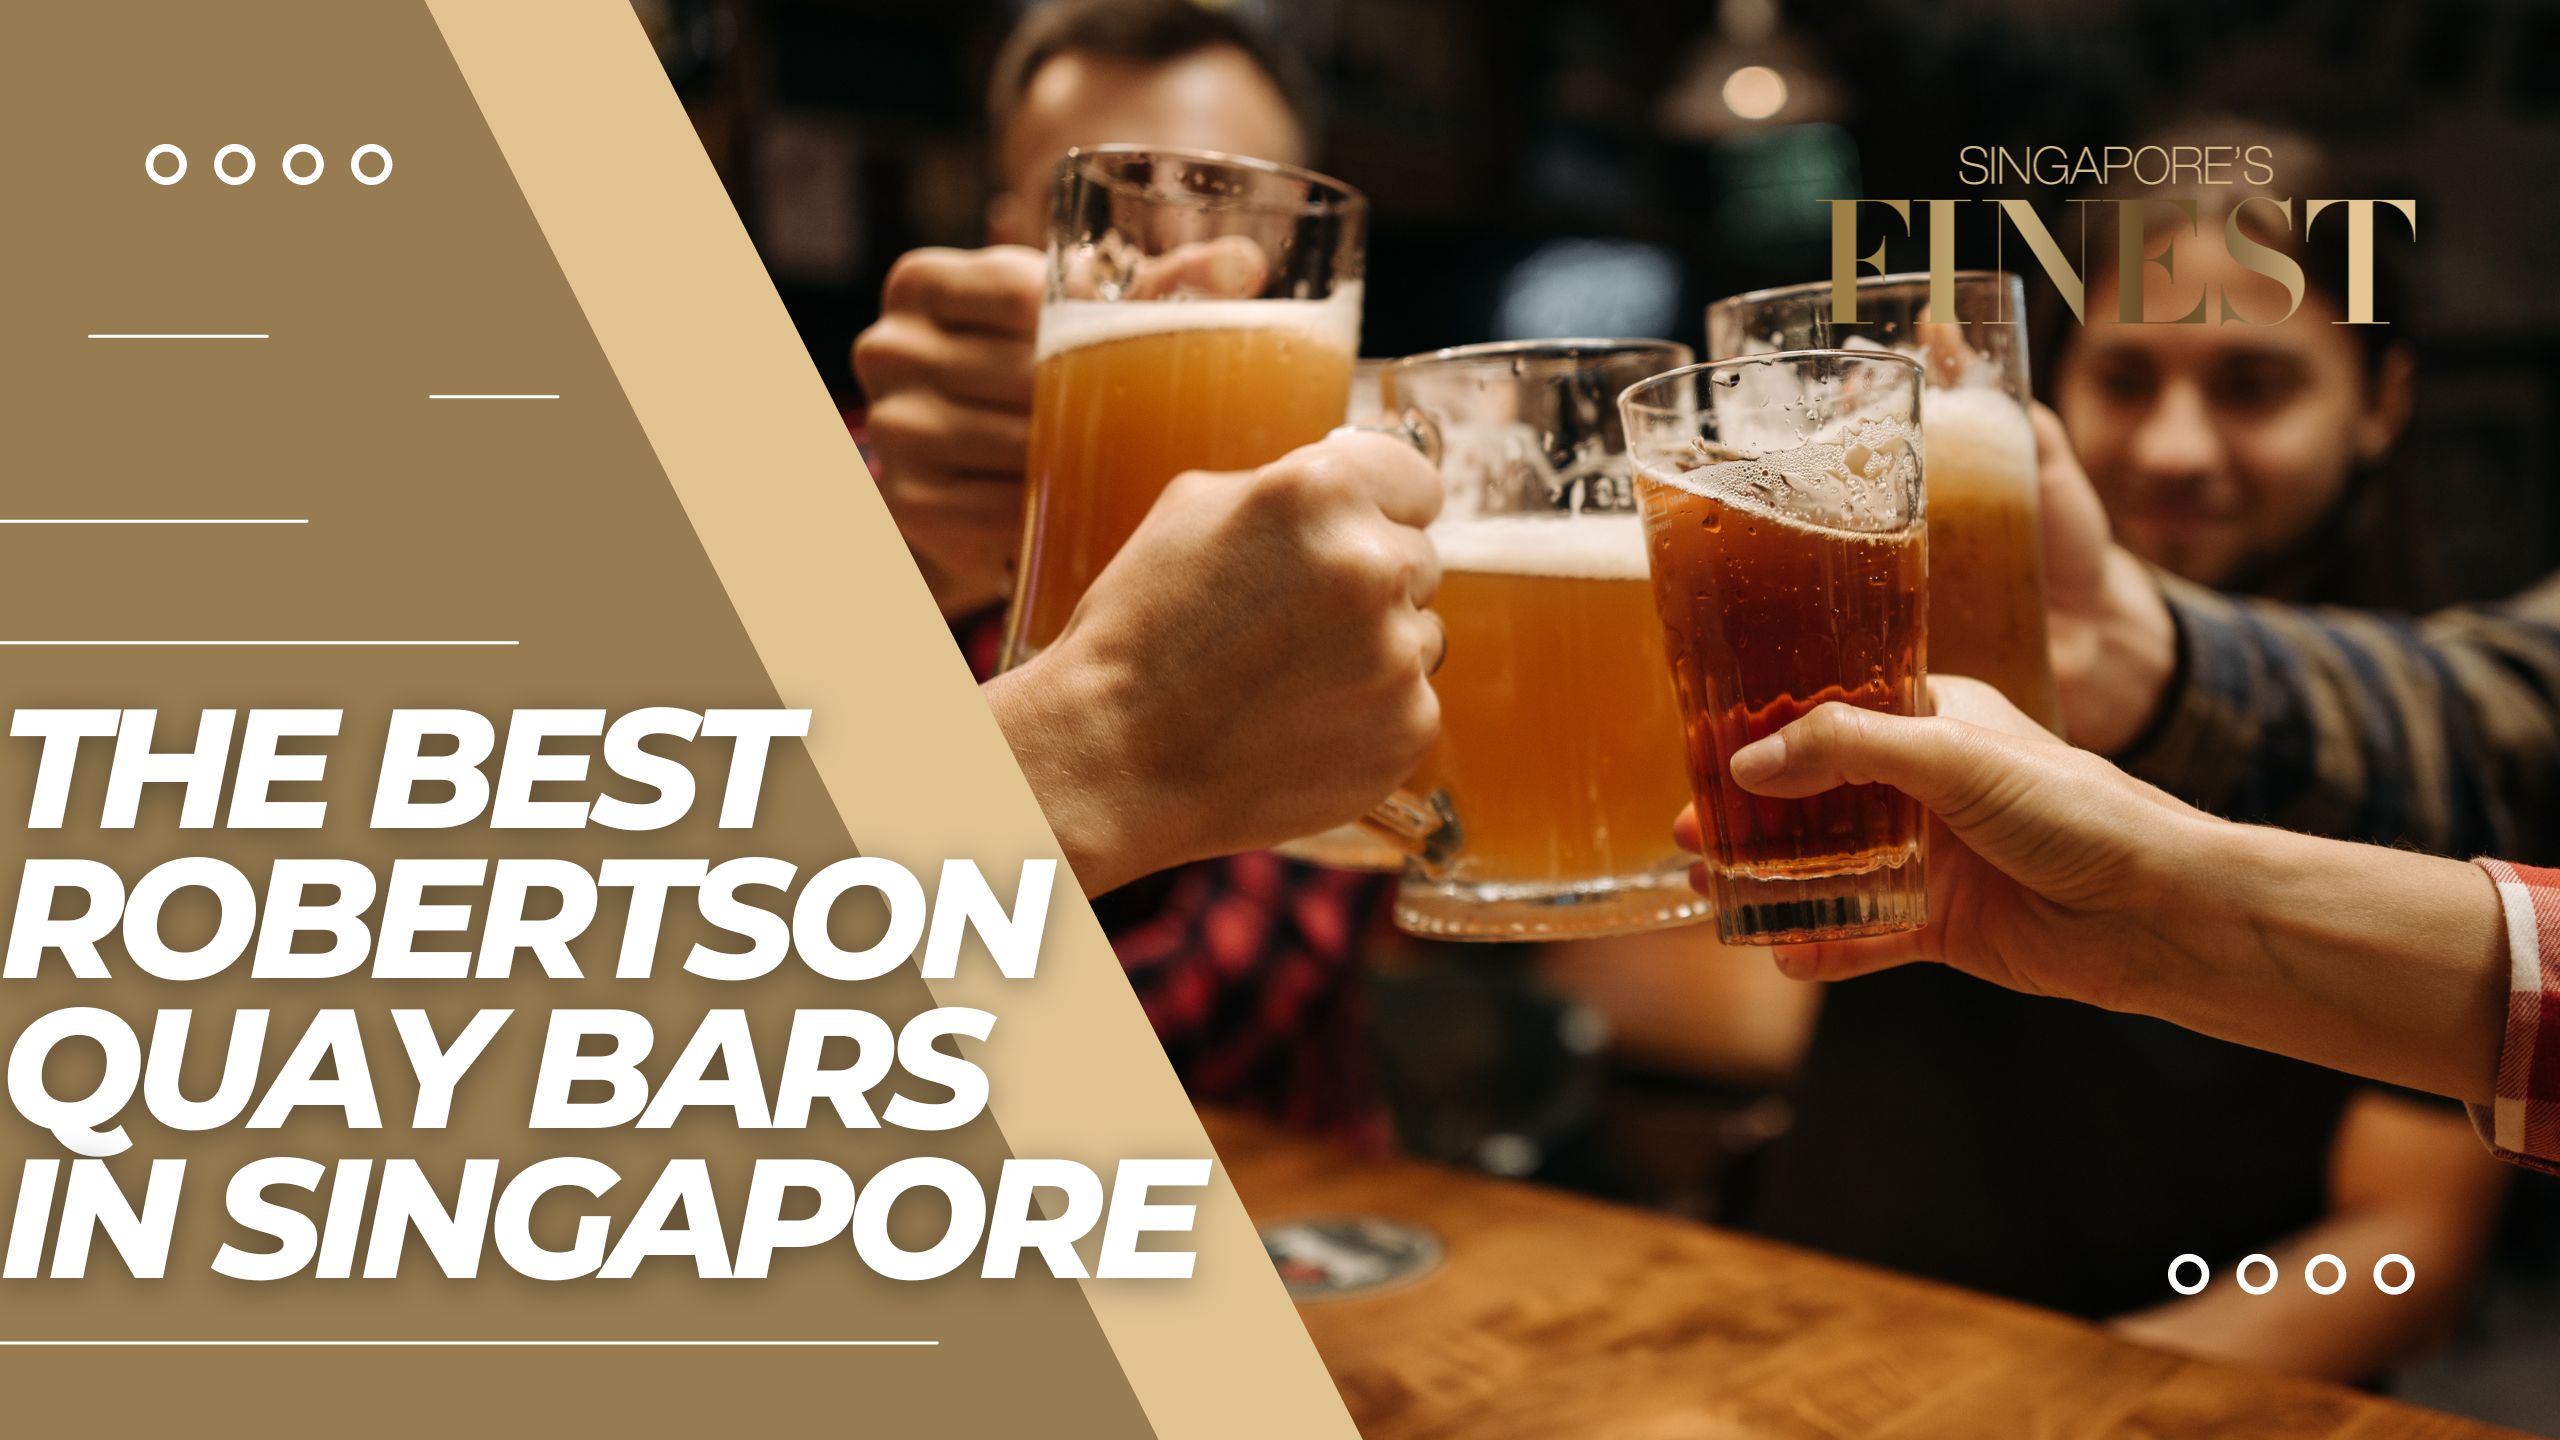 The Finest Robertson Quay Bars in Singapore